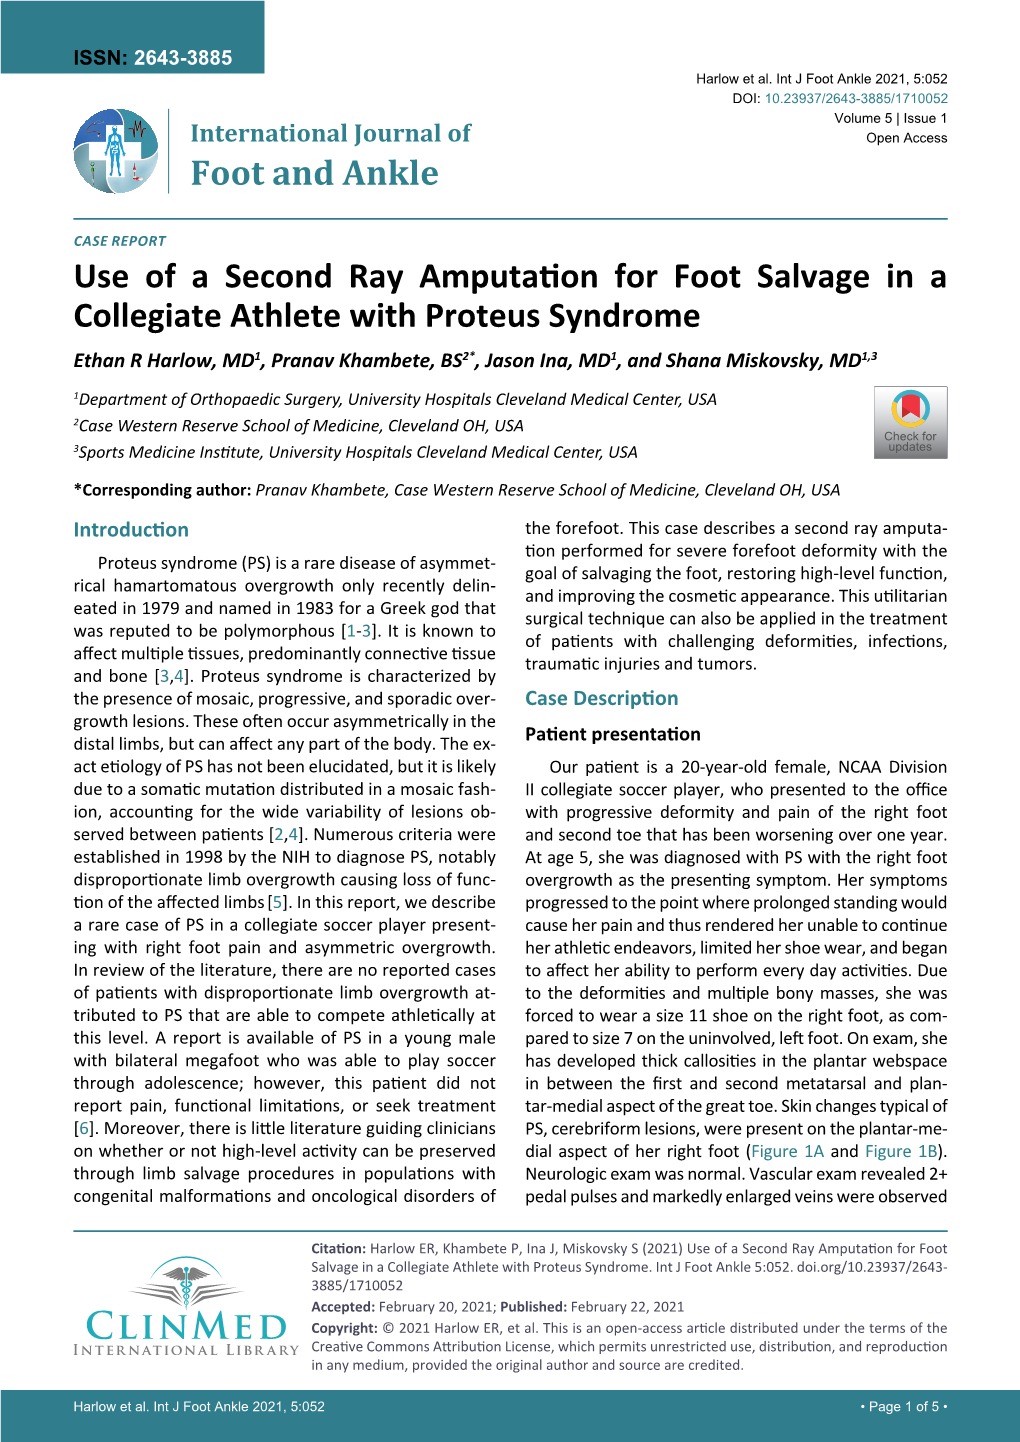 Use of a Second Ray Amputation for Foot Salvage in a Collegiate Athlete